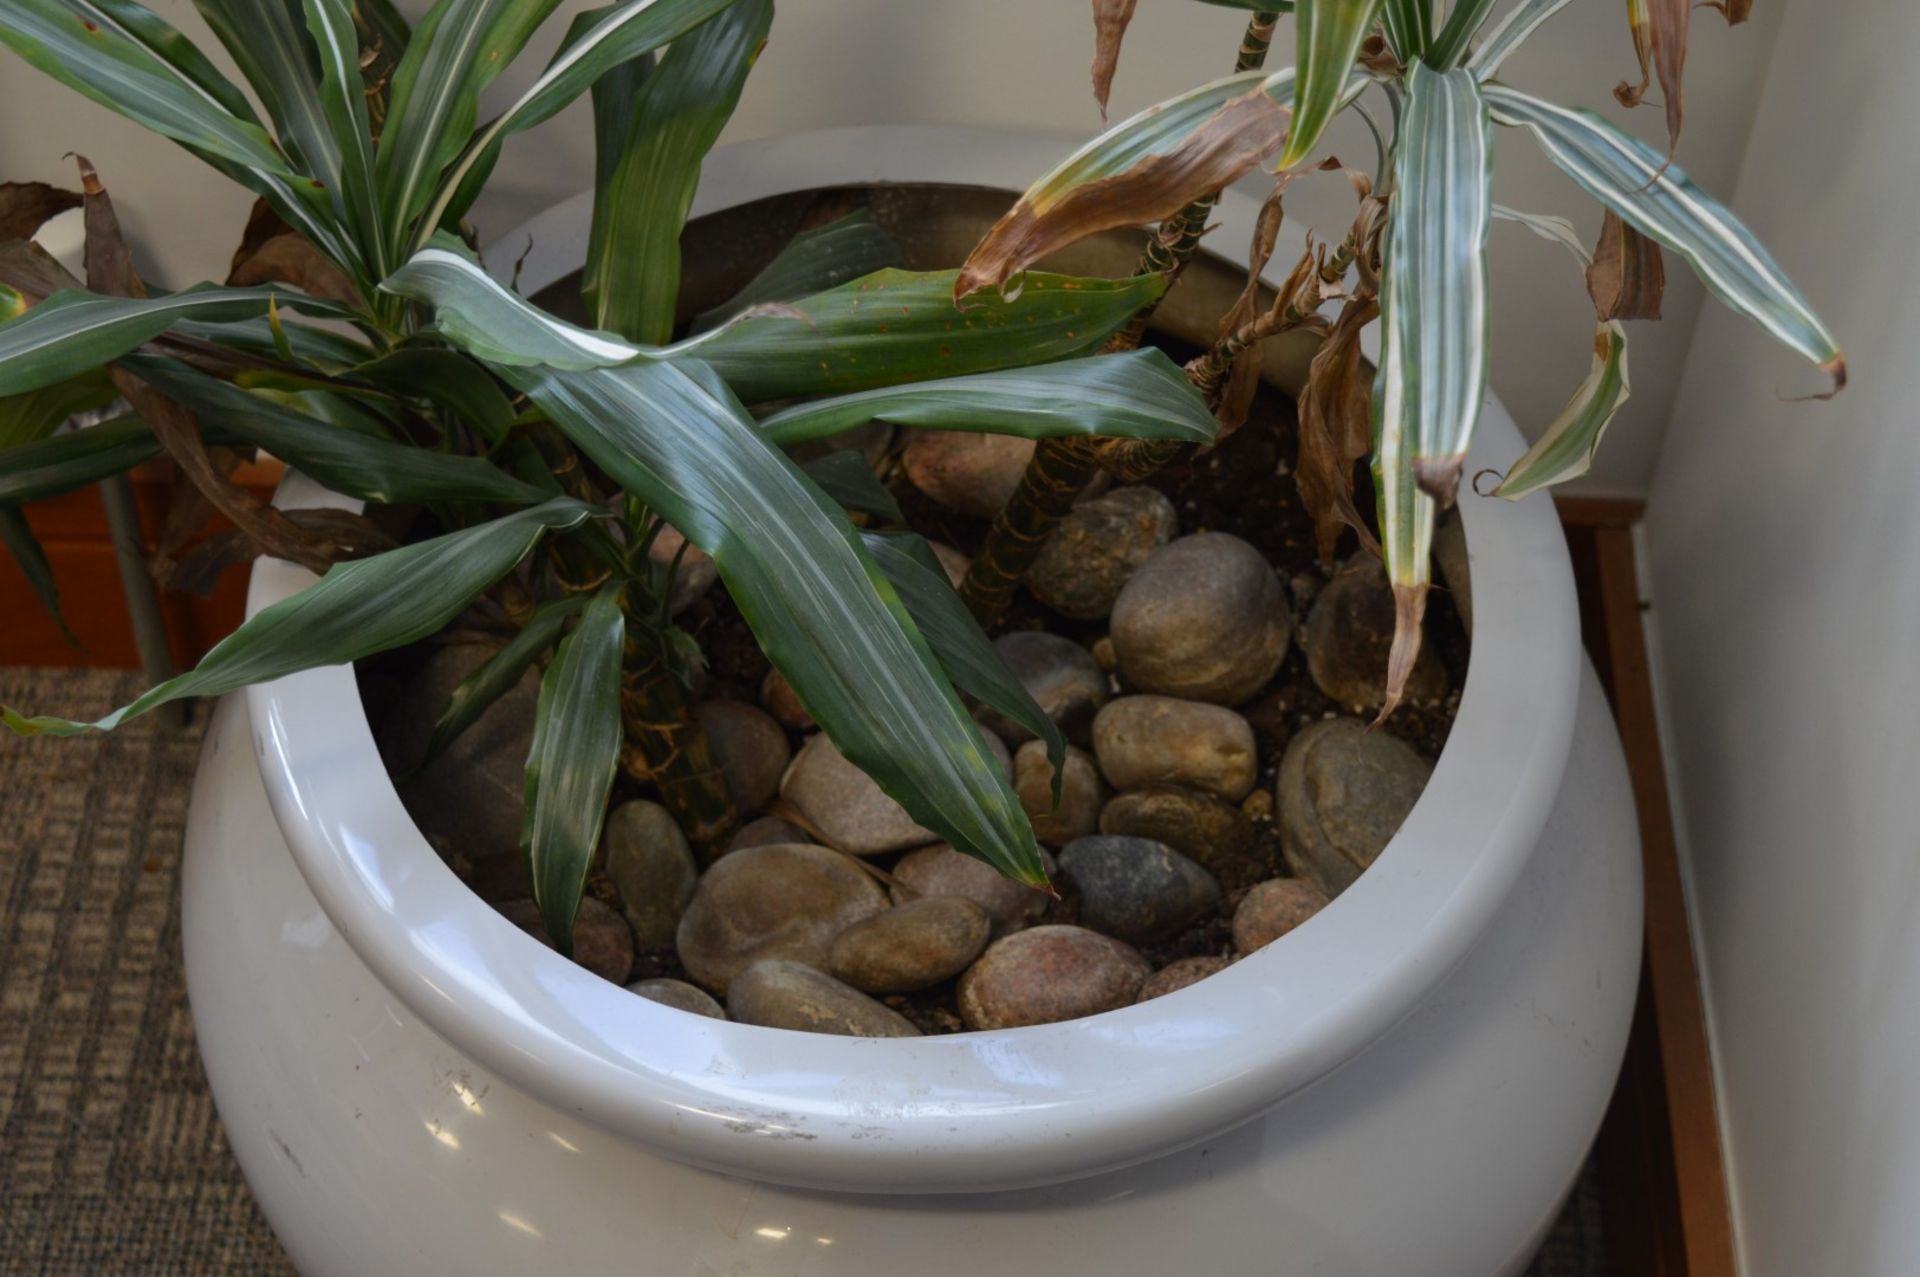 1 x Potted Plant Pot With Plant and Stones - Large Size - Ideal For The Home or Office - Approx - Image 2 of 4